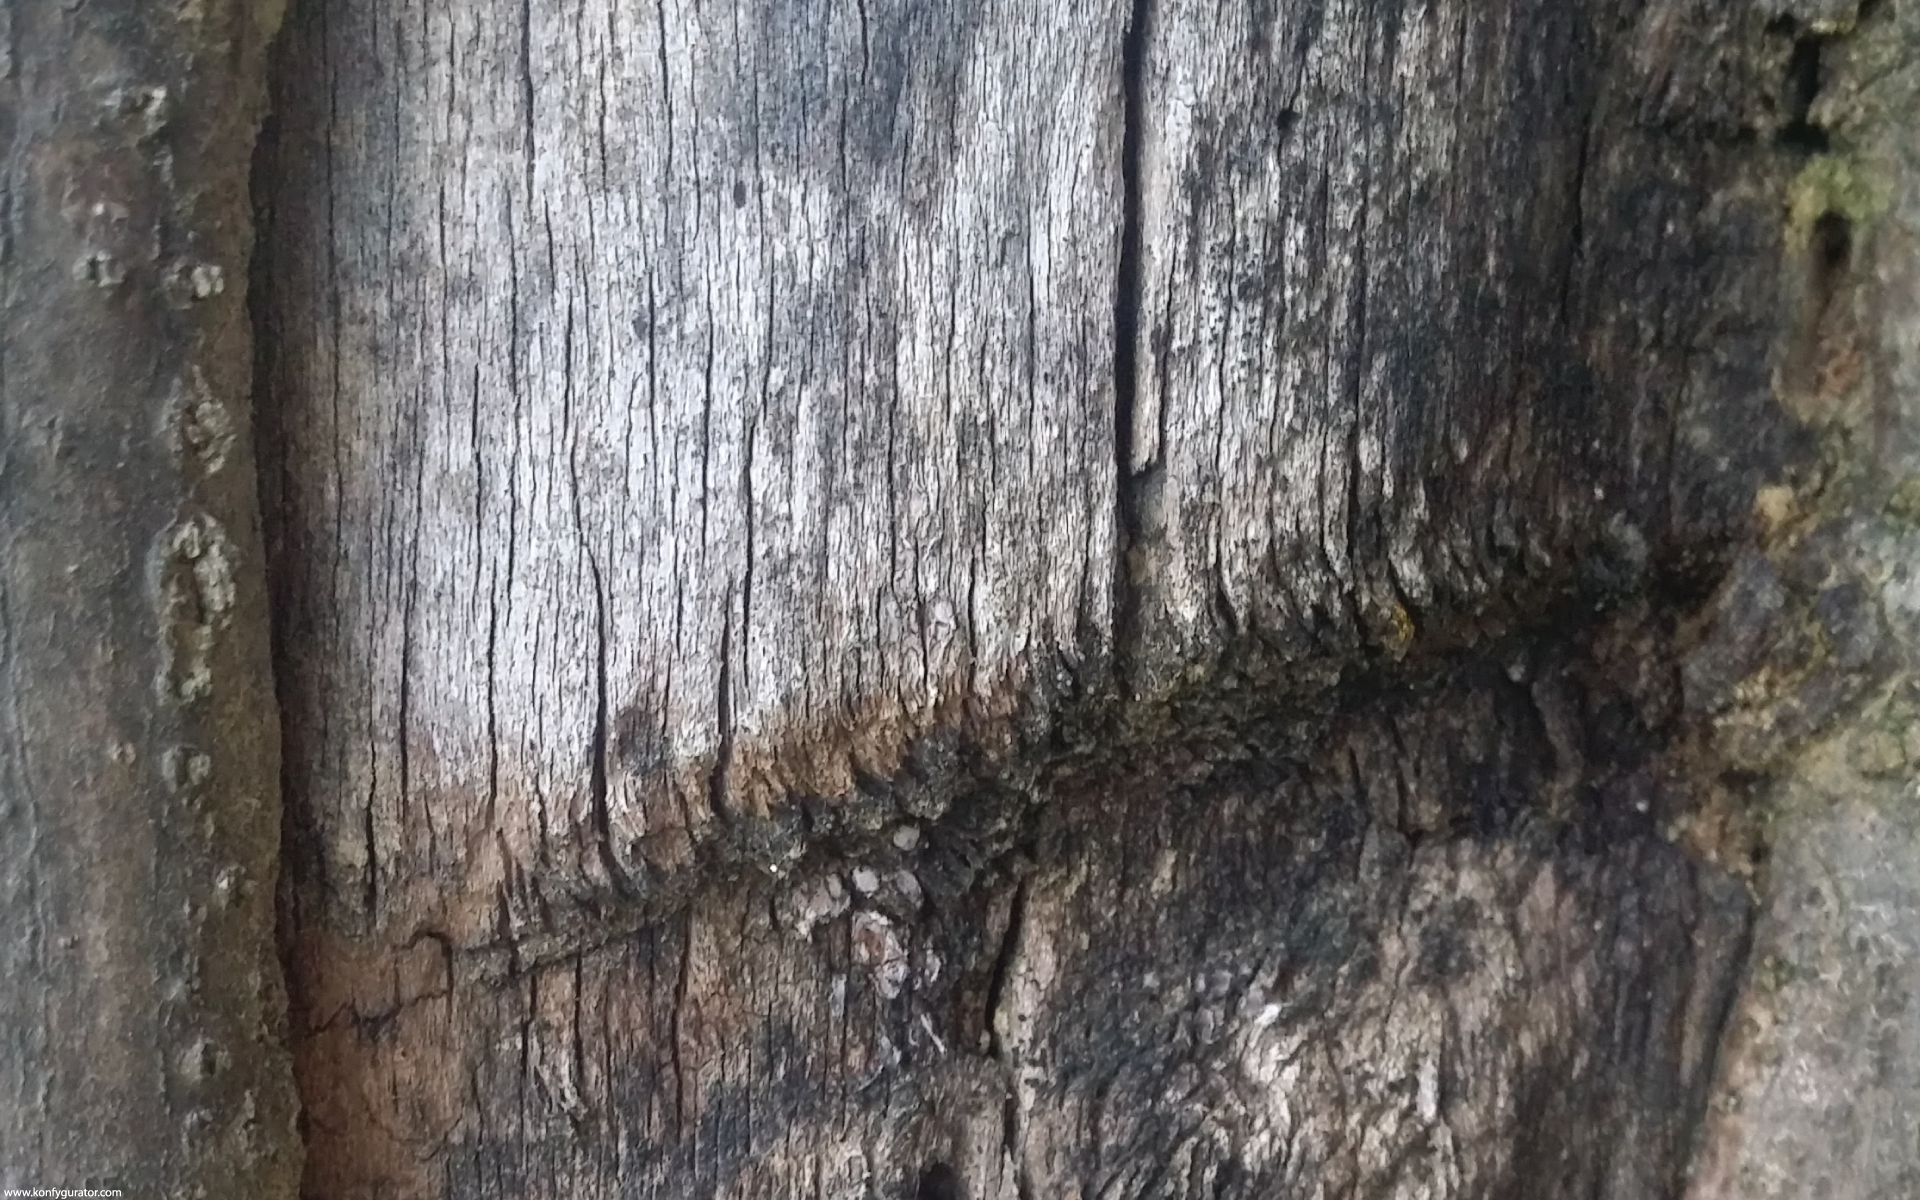 HD Wallpapers - Textures - bark, wood, old